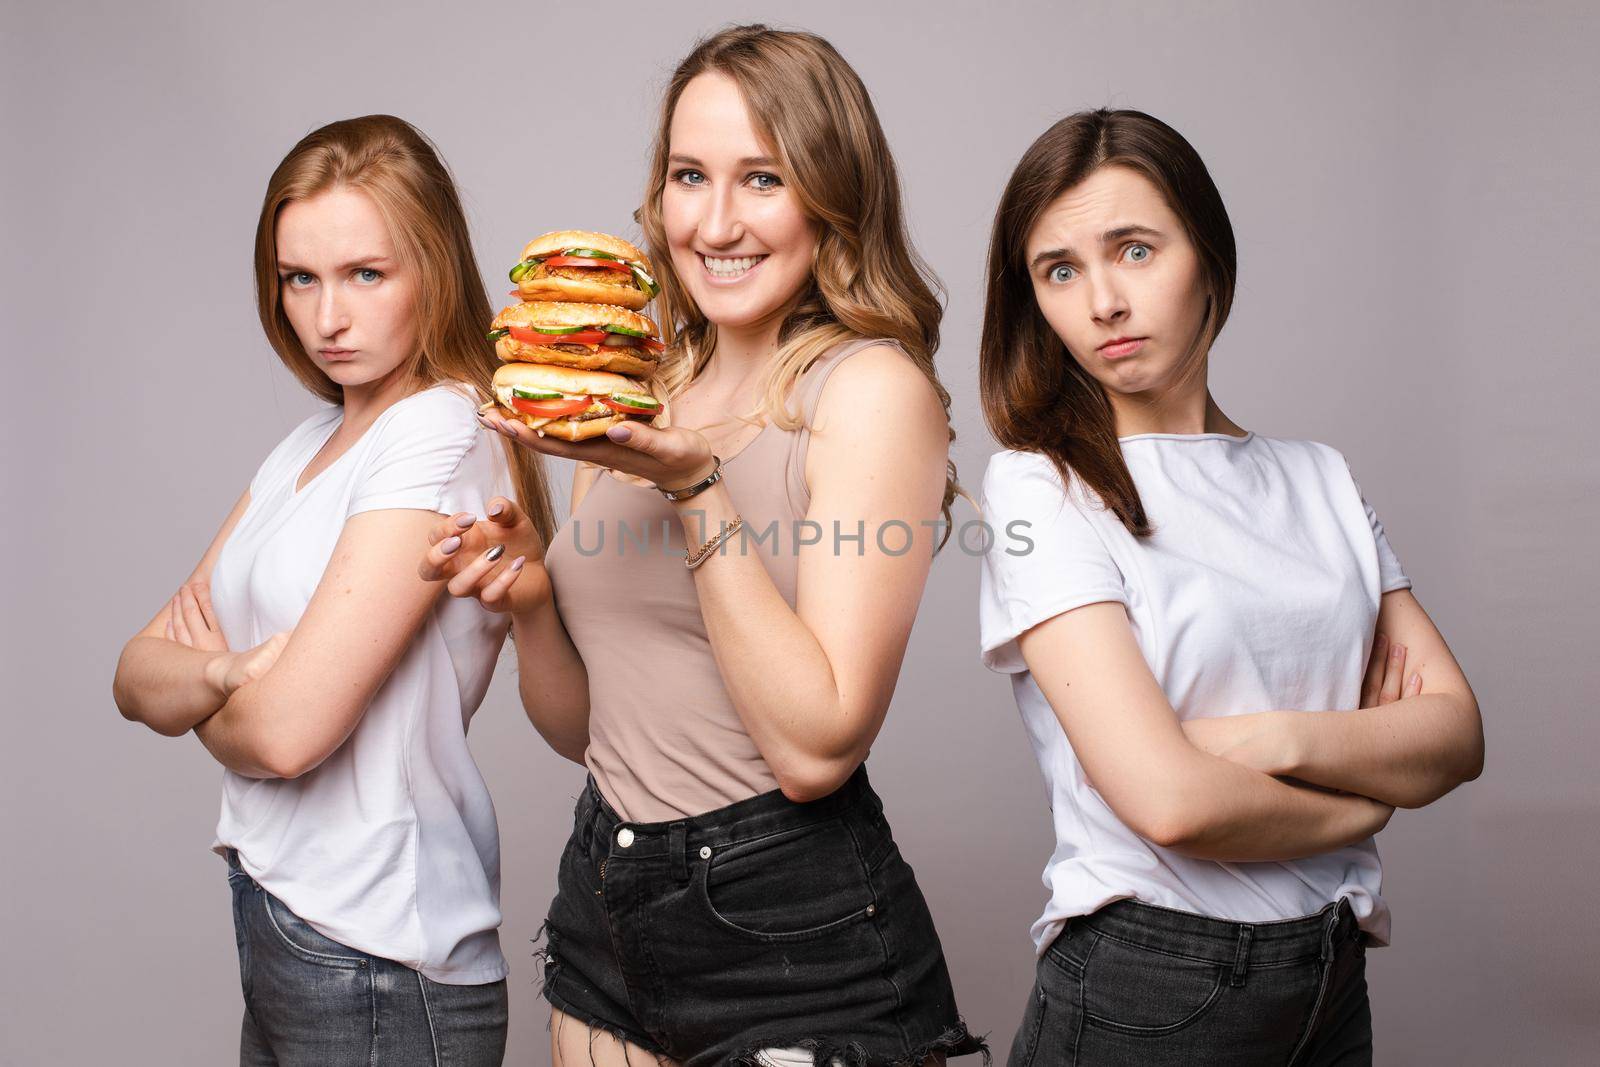 Front view of cheerful woman keeping big delicious burger and laughing while sad girls standing near and looking at fast food. Three models posing on isolated background. Concept of food and diet.